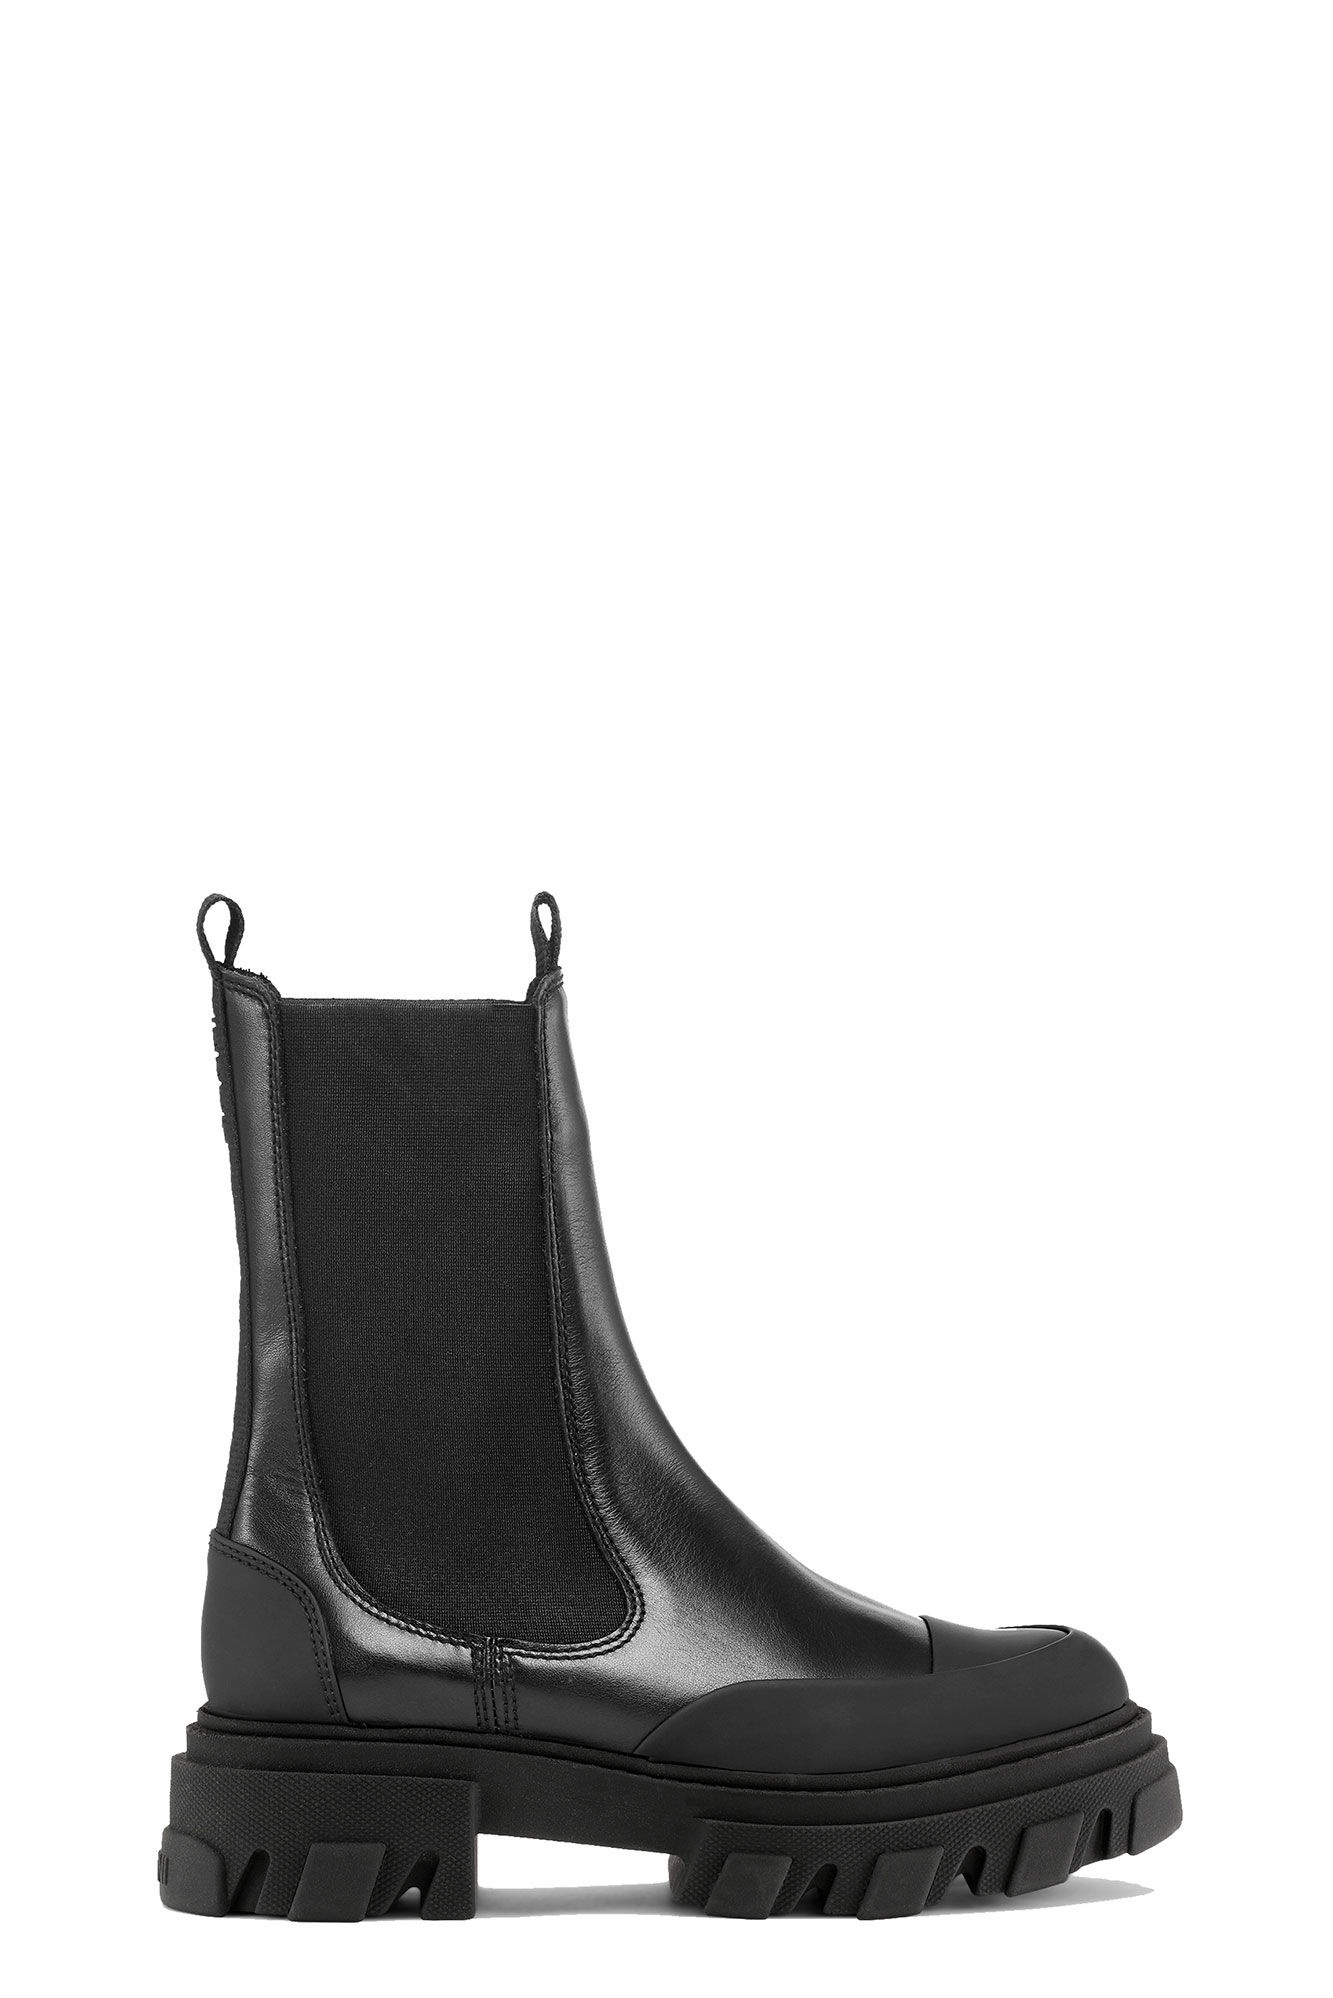 BLACK STITCH CLEATED MID CHELSEA BOOTS - 1